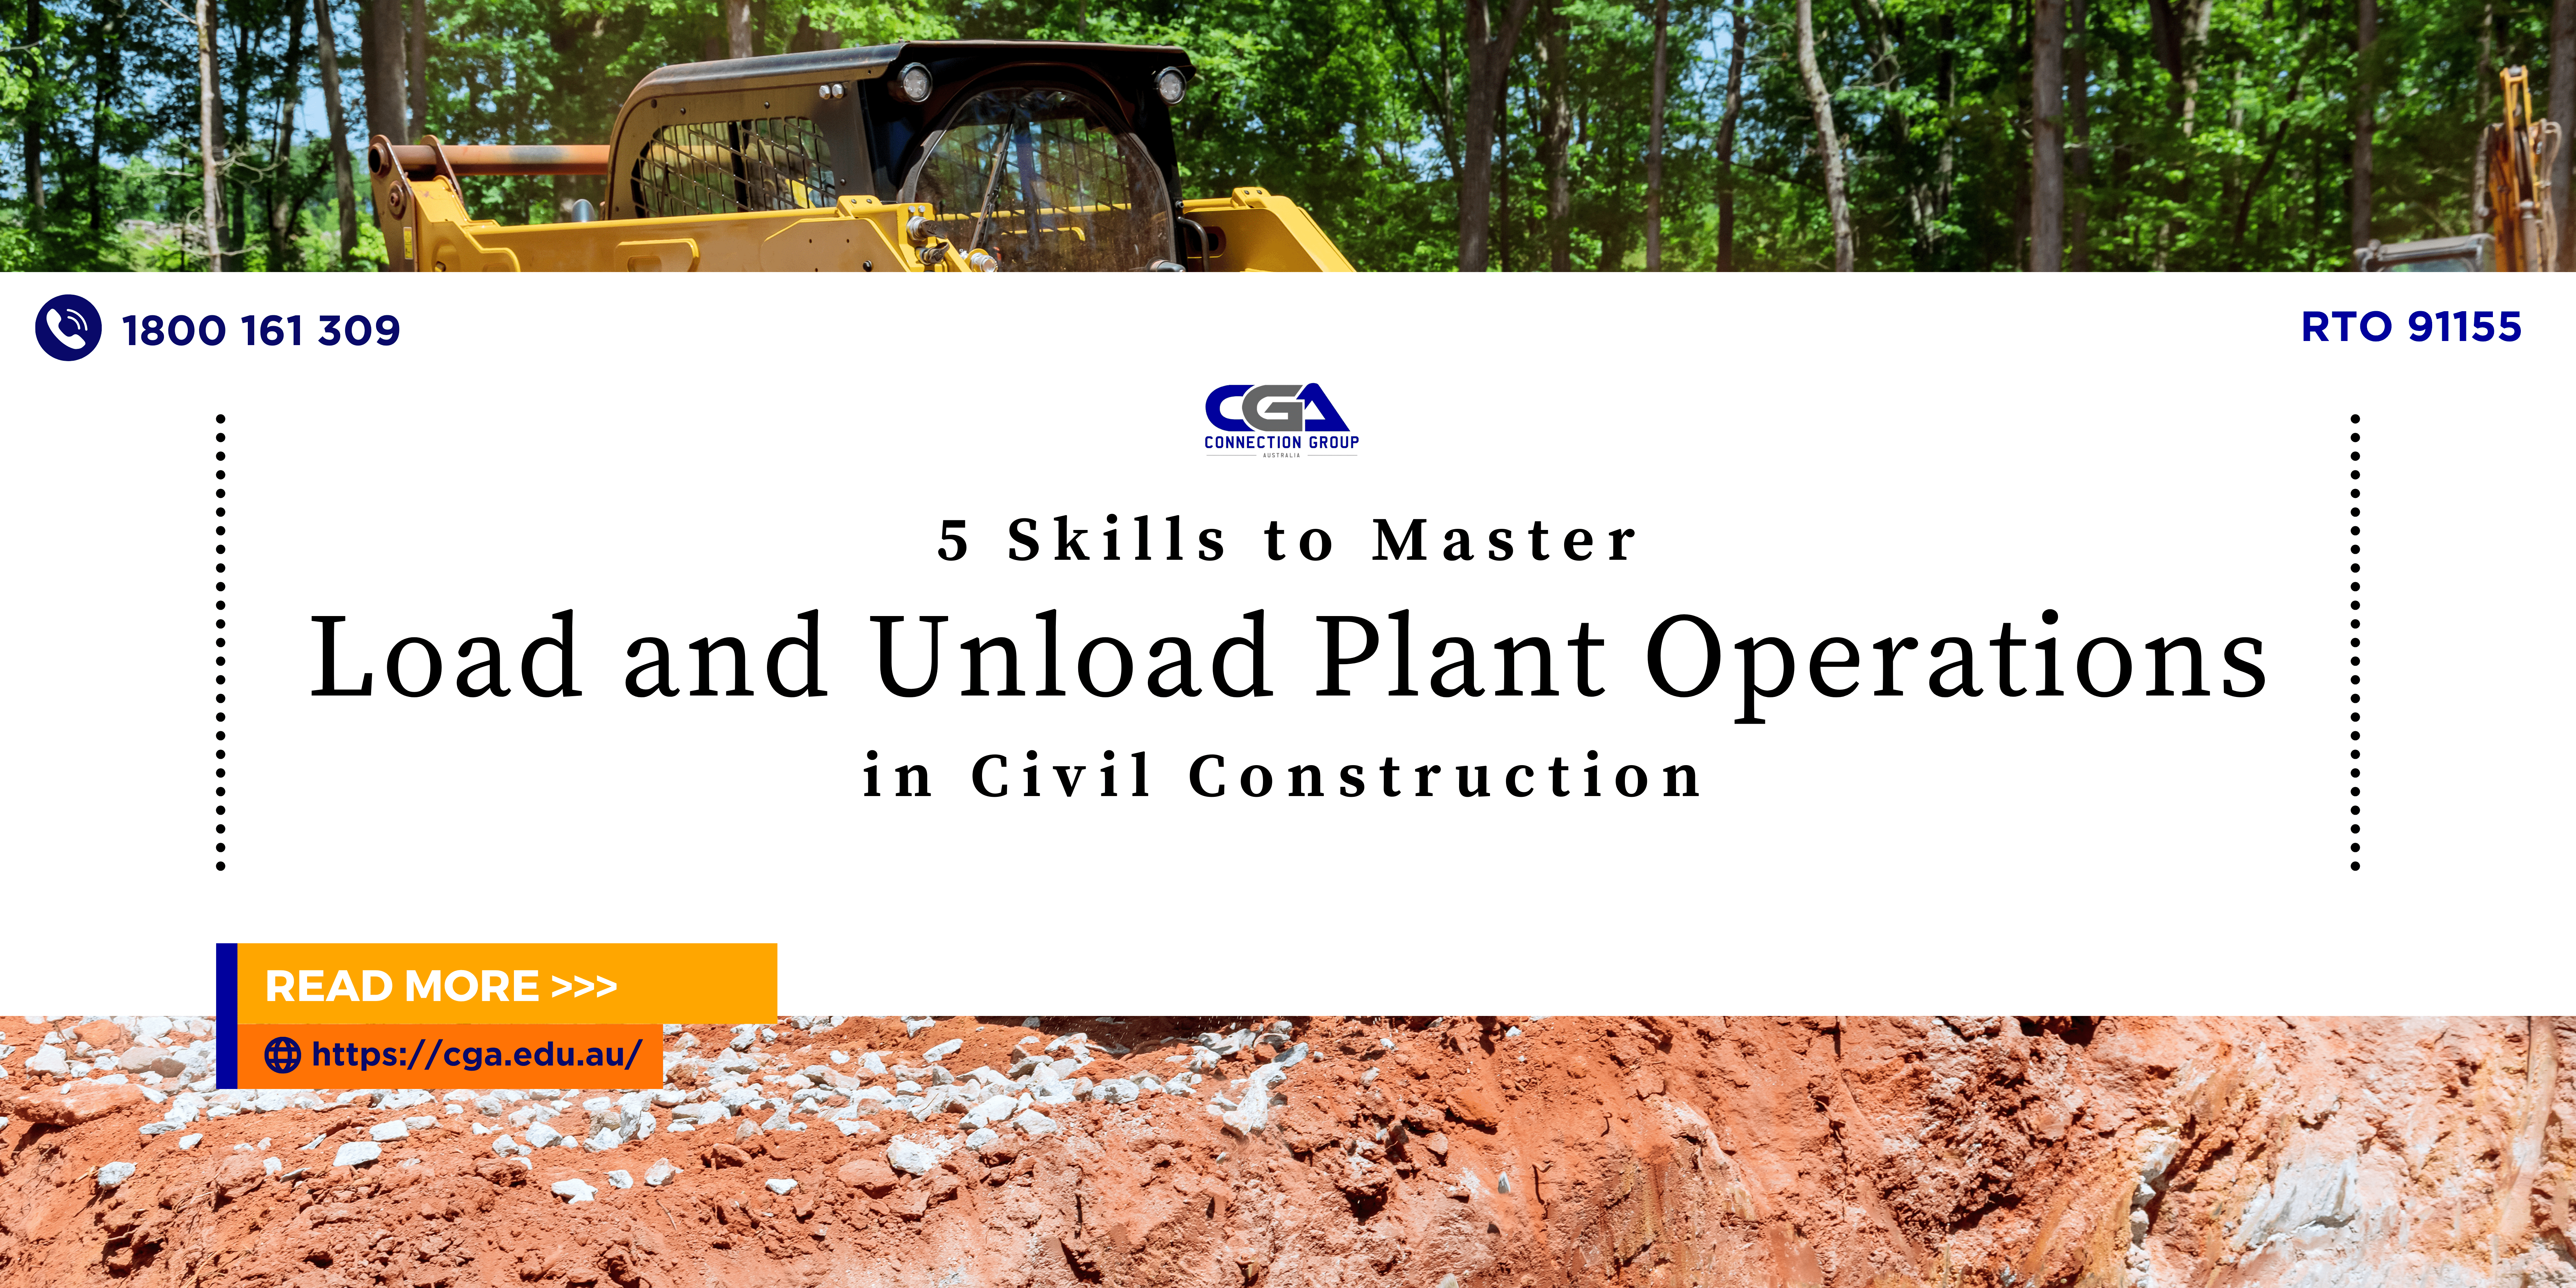 Learn about load and unload plant